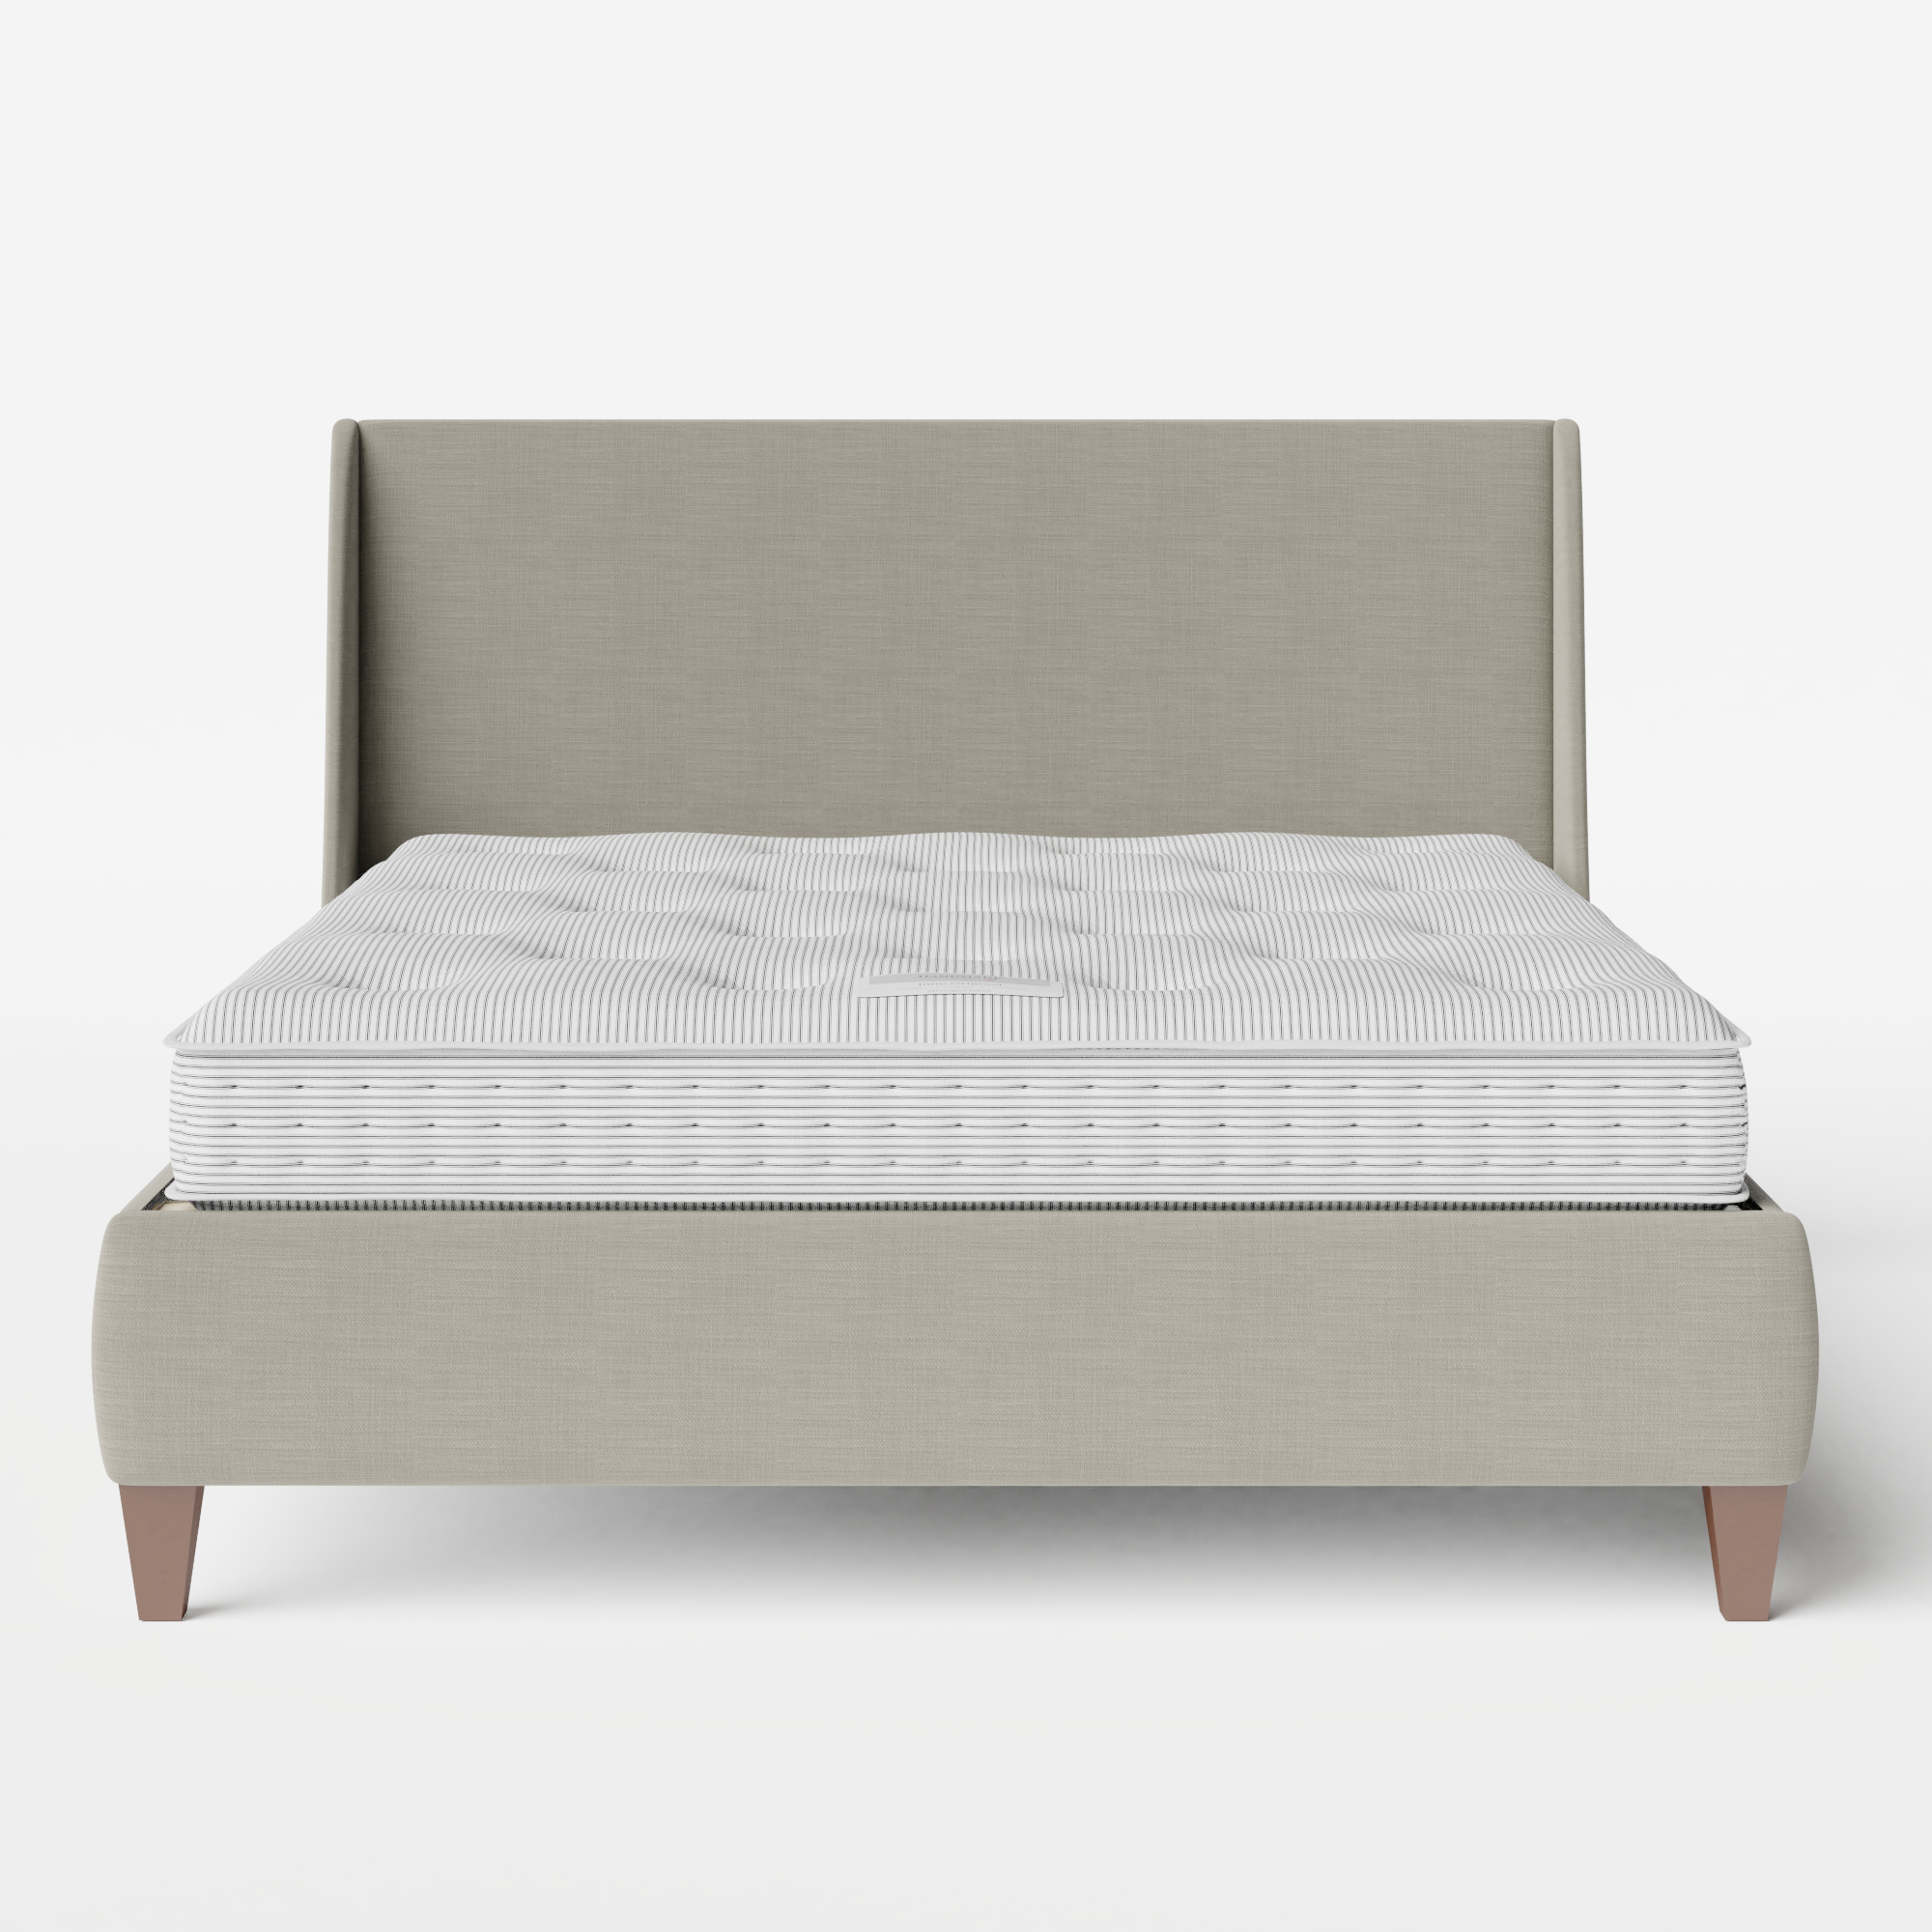 Sunderland upholstered bed in grey fabric with Juno mattress